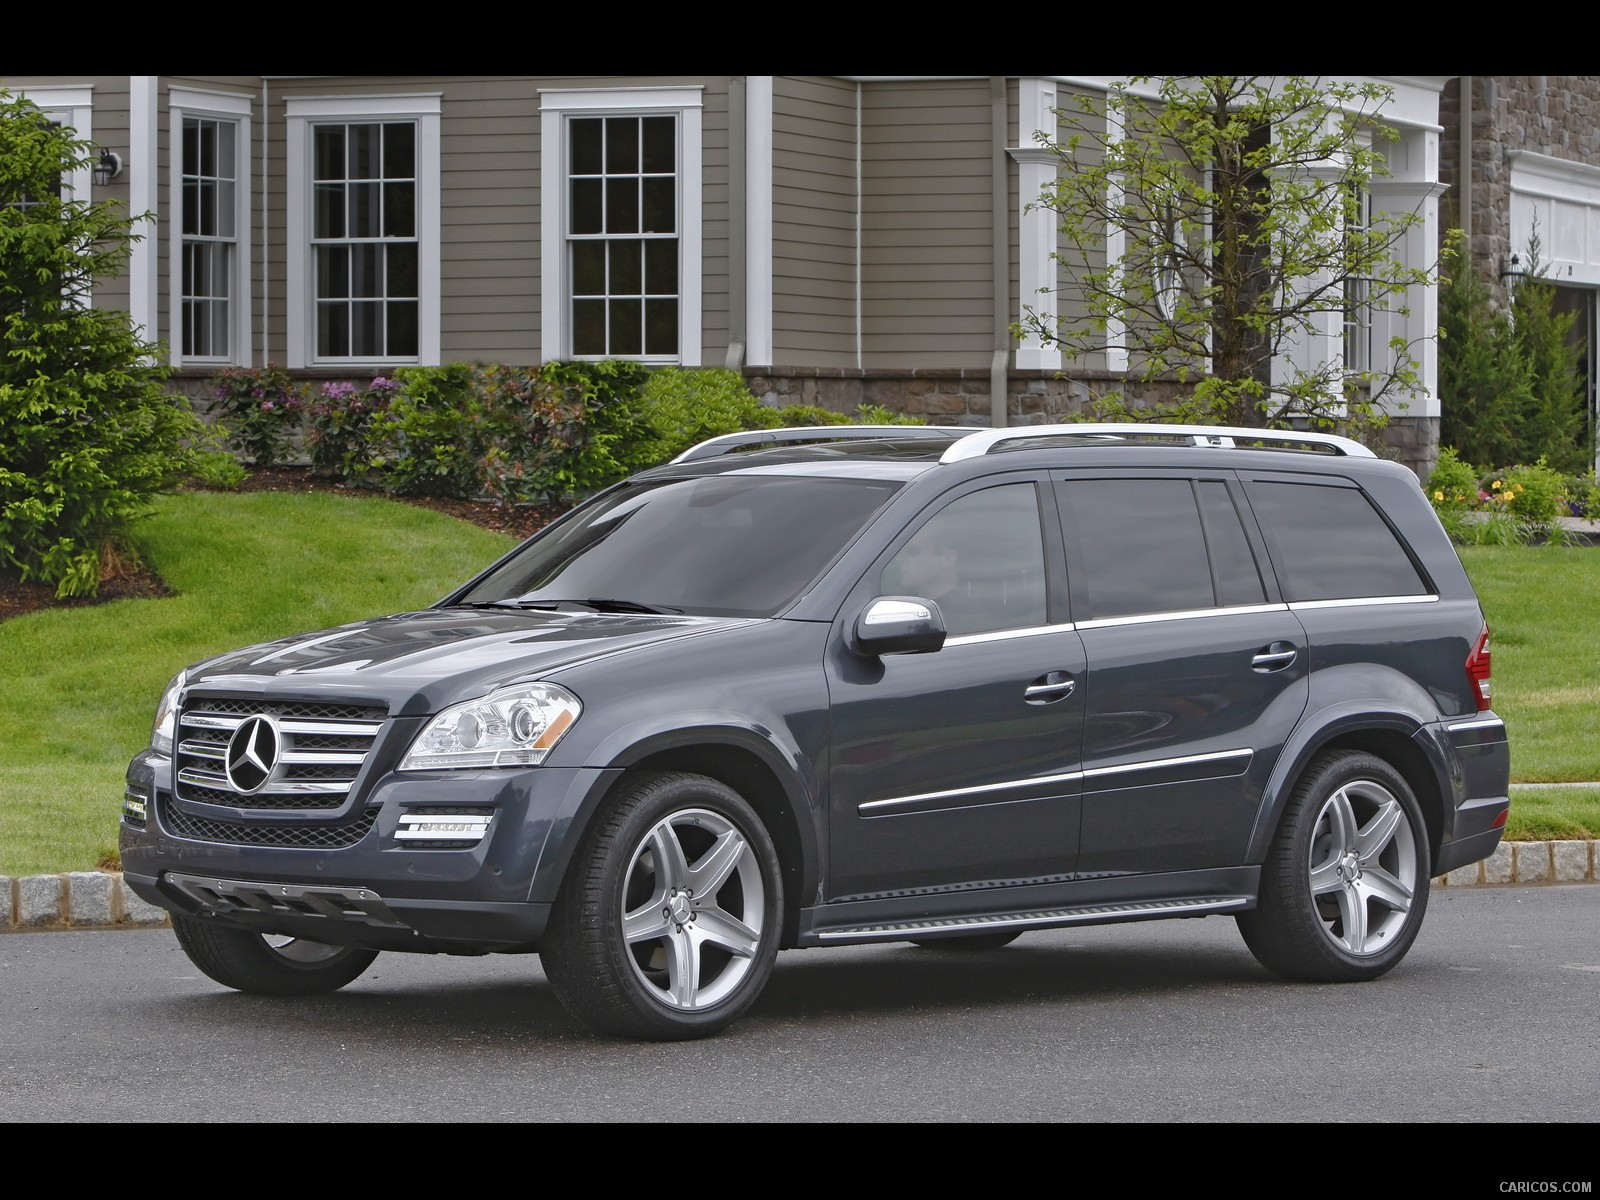 2010 Mercedes-Benz GL550 - Front, #42 of 112